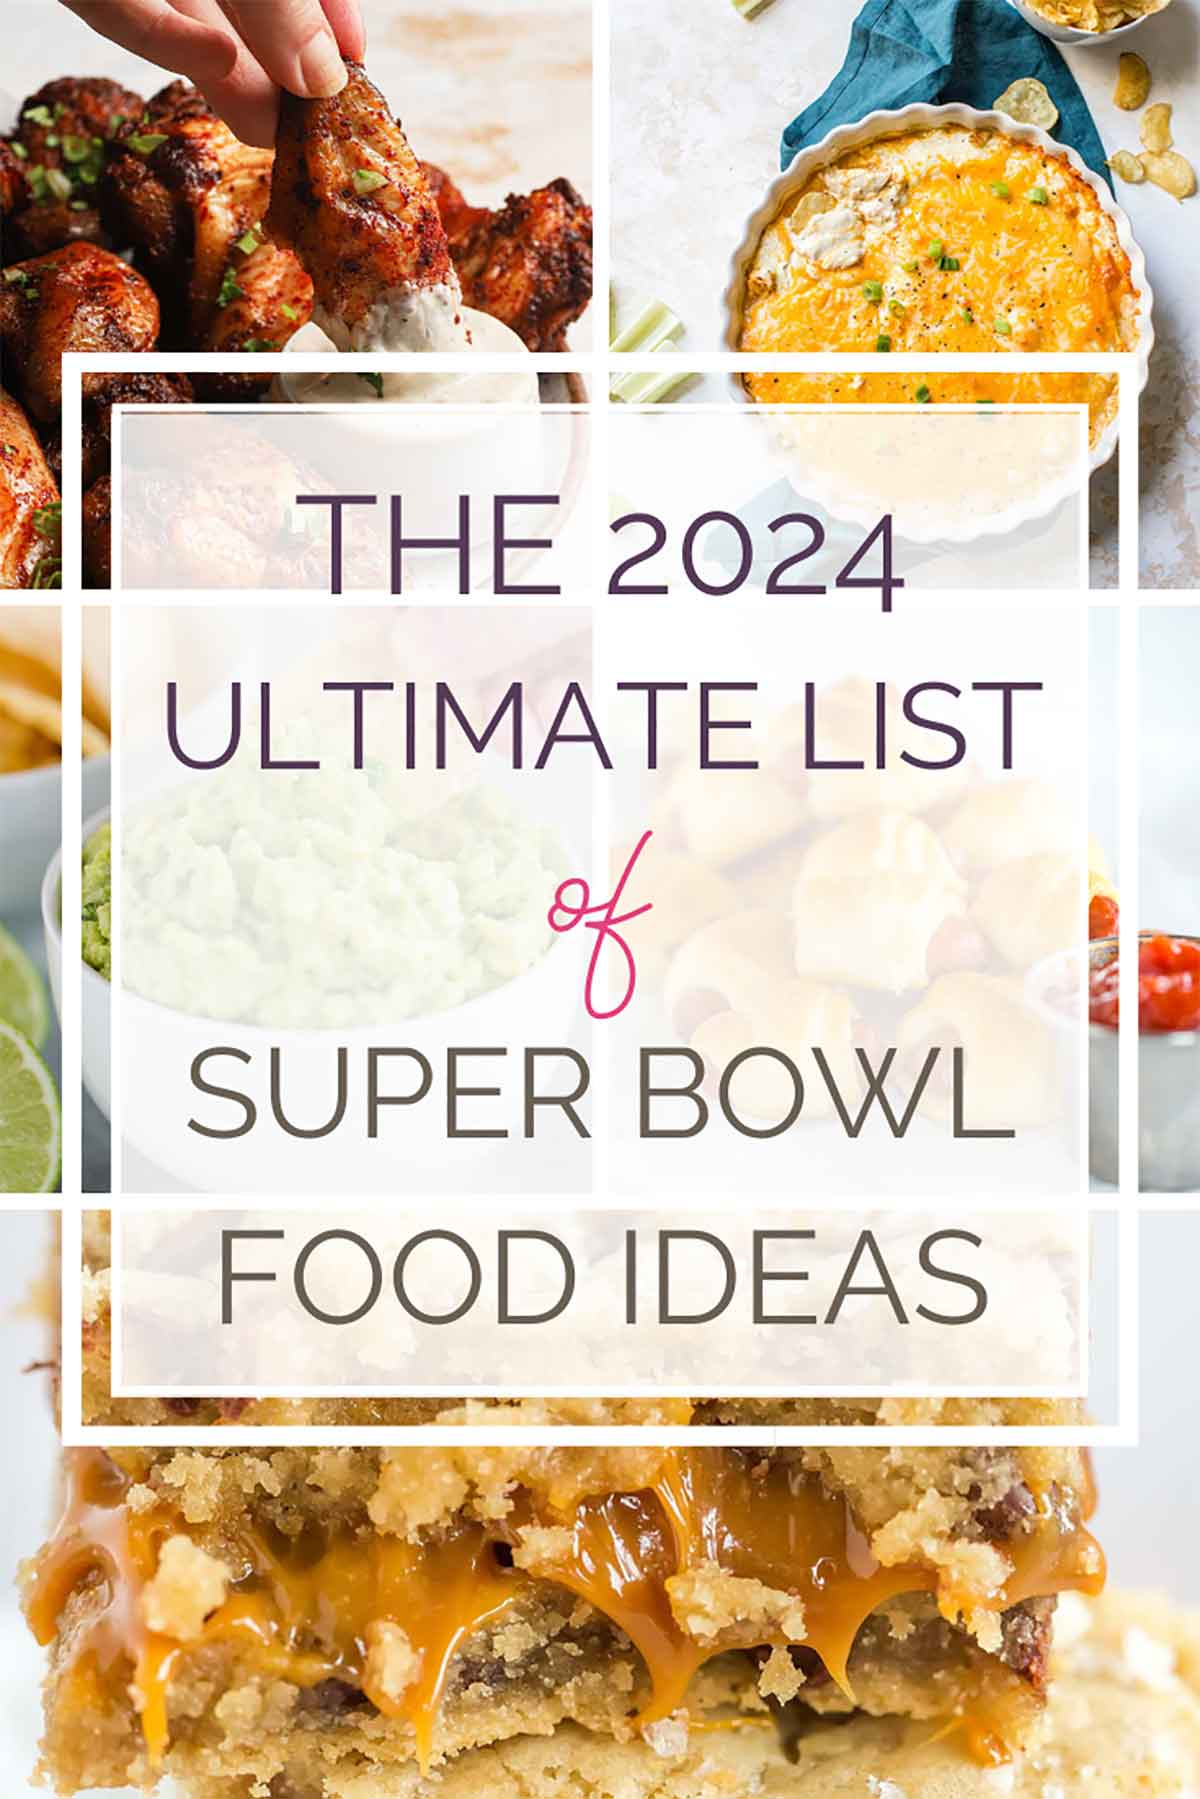 Collage of five photos: chicken wings, buffalo chicken dip, guacamole, pigs in a blanket, and salted caramel chocolate chip cookie bars with text overlay: "The 2024 Ultimate List of Super Bowl Food Ideas".